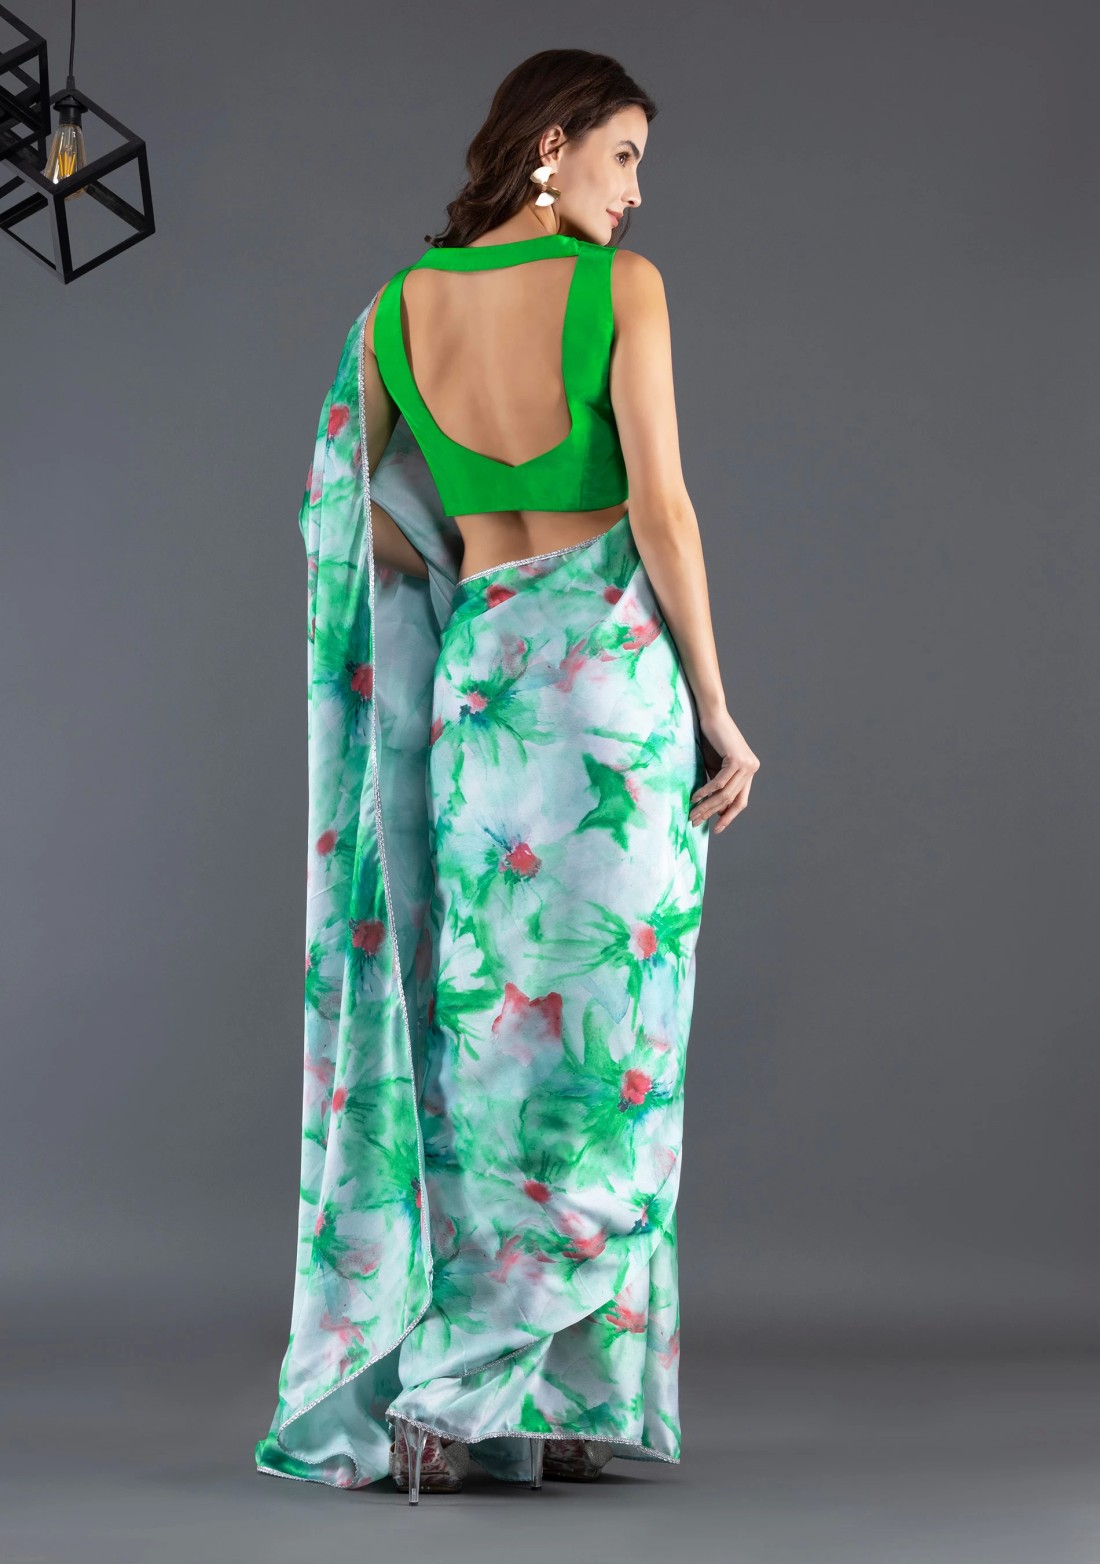 Green & Coral Marble Floral Printed Modal Satin Ready-to-Wear Saree